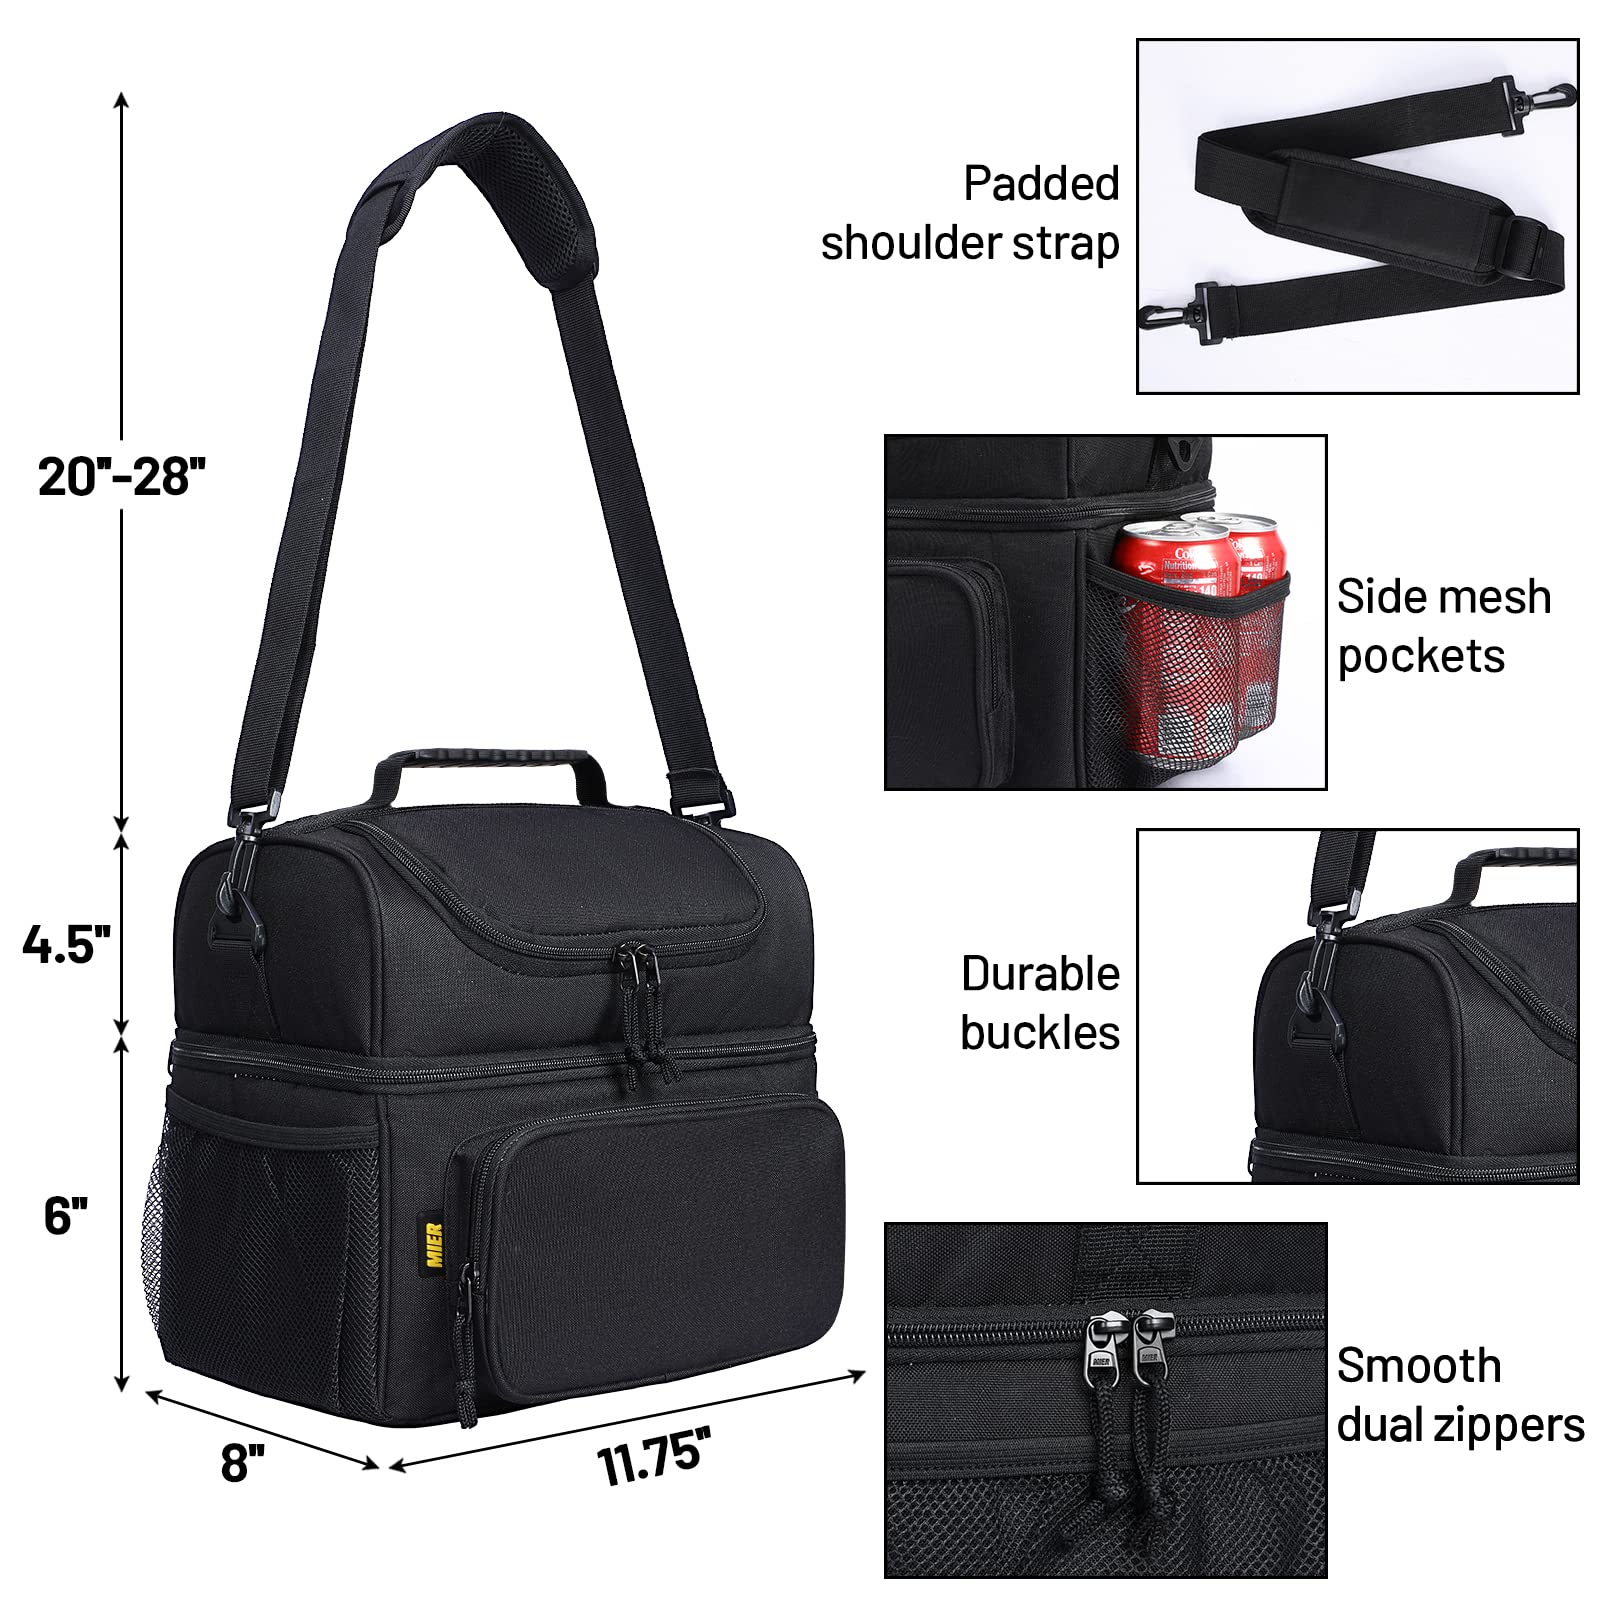 MIER Mens Insulated Lunch Box, Dual Compartment Large Lunch Bag Coolers with Shoulder Strap for Men Women Adult to Office Work, Picnic, Travel, Outdoors, Black